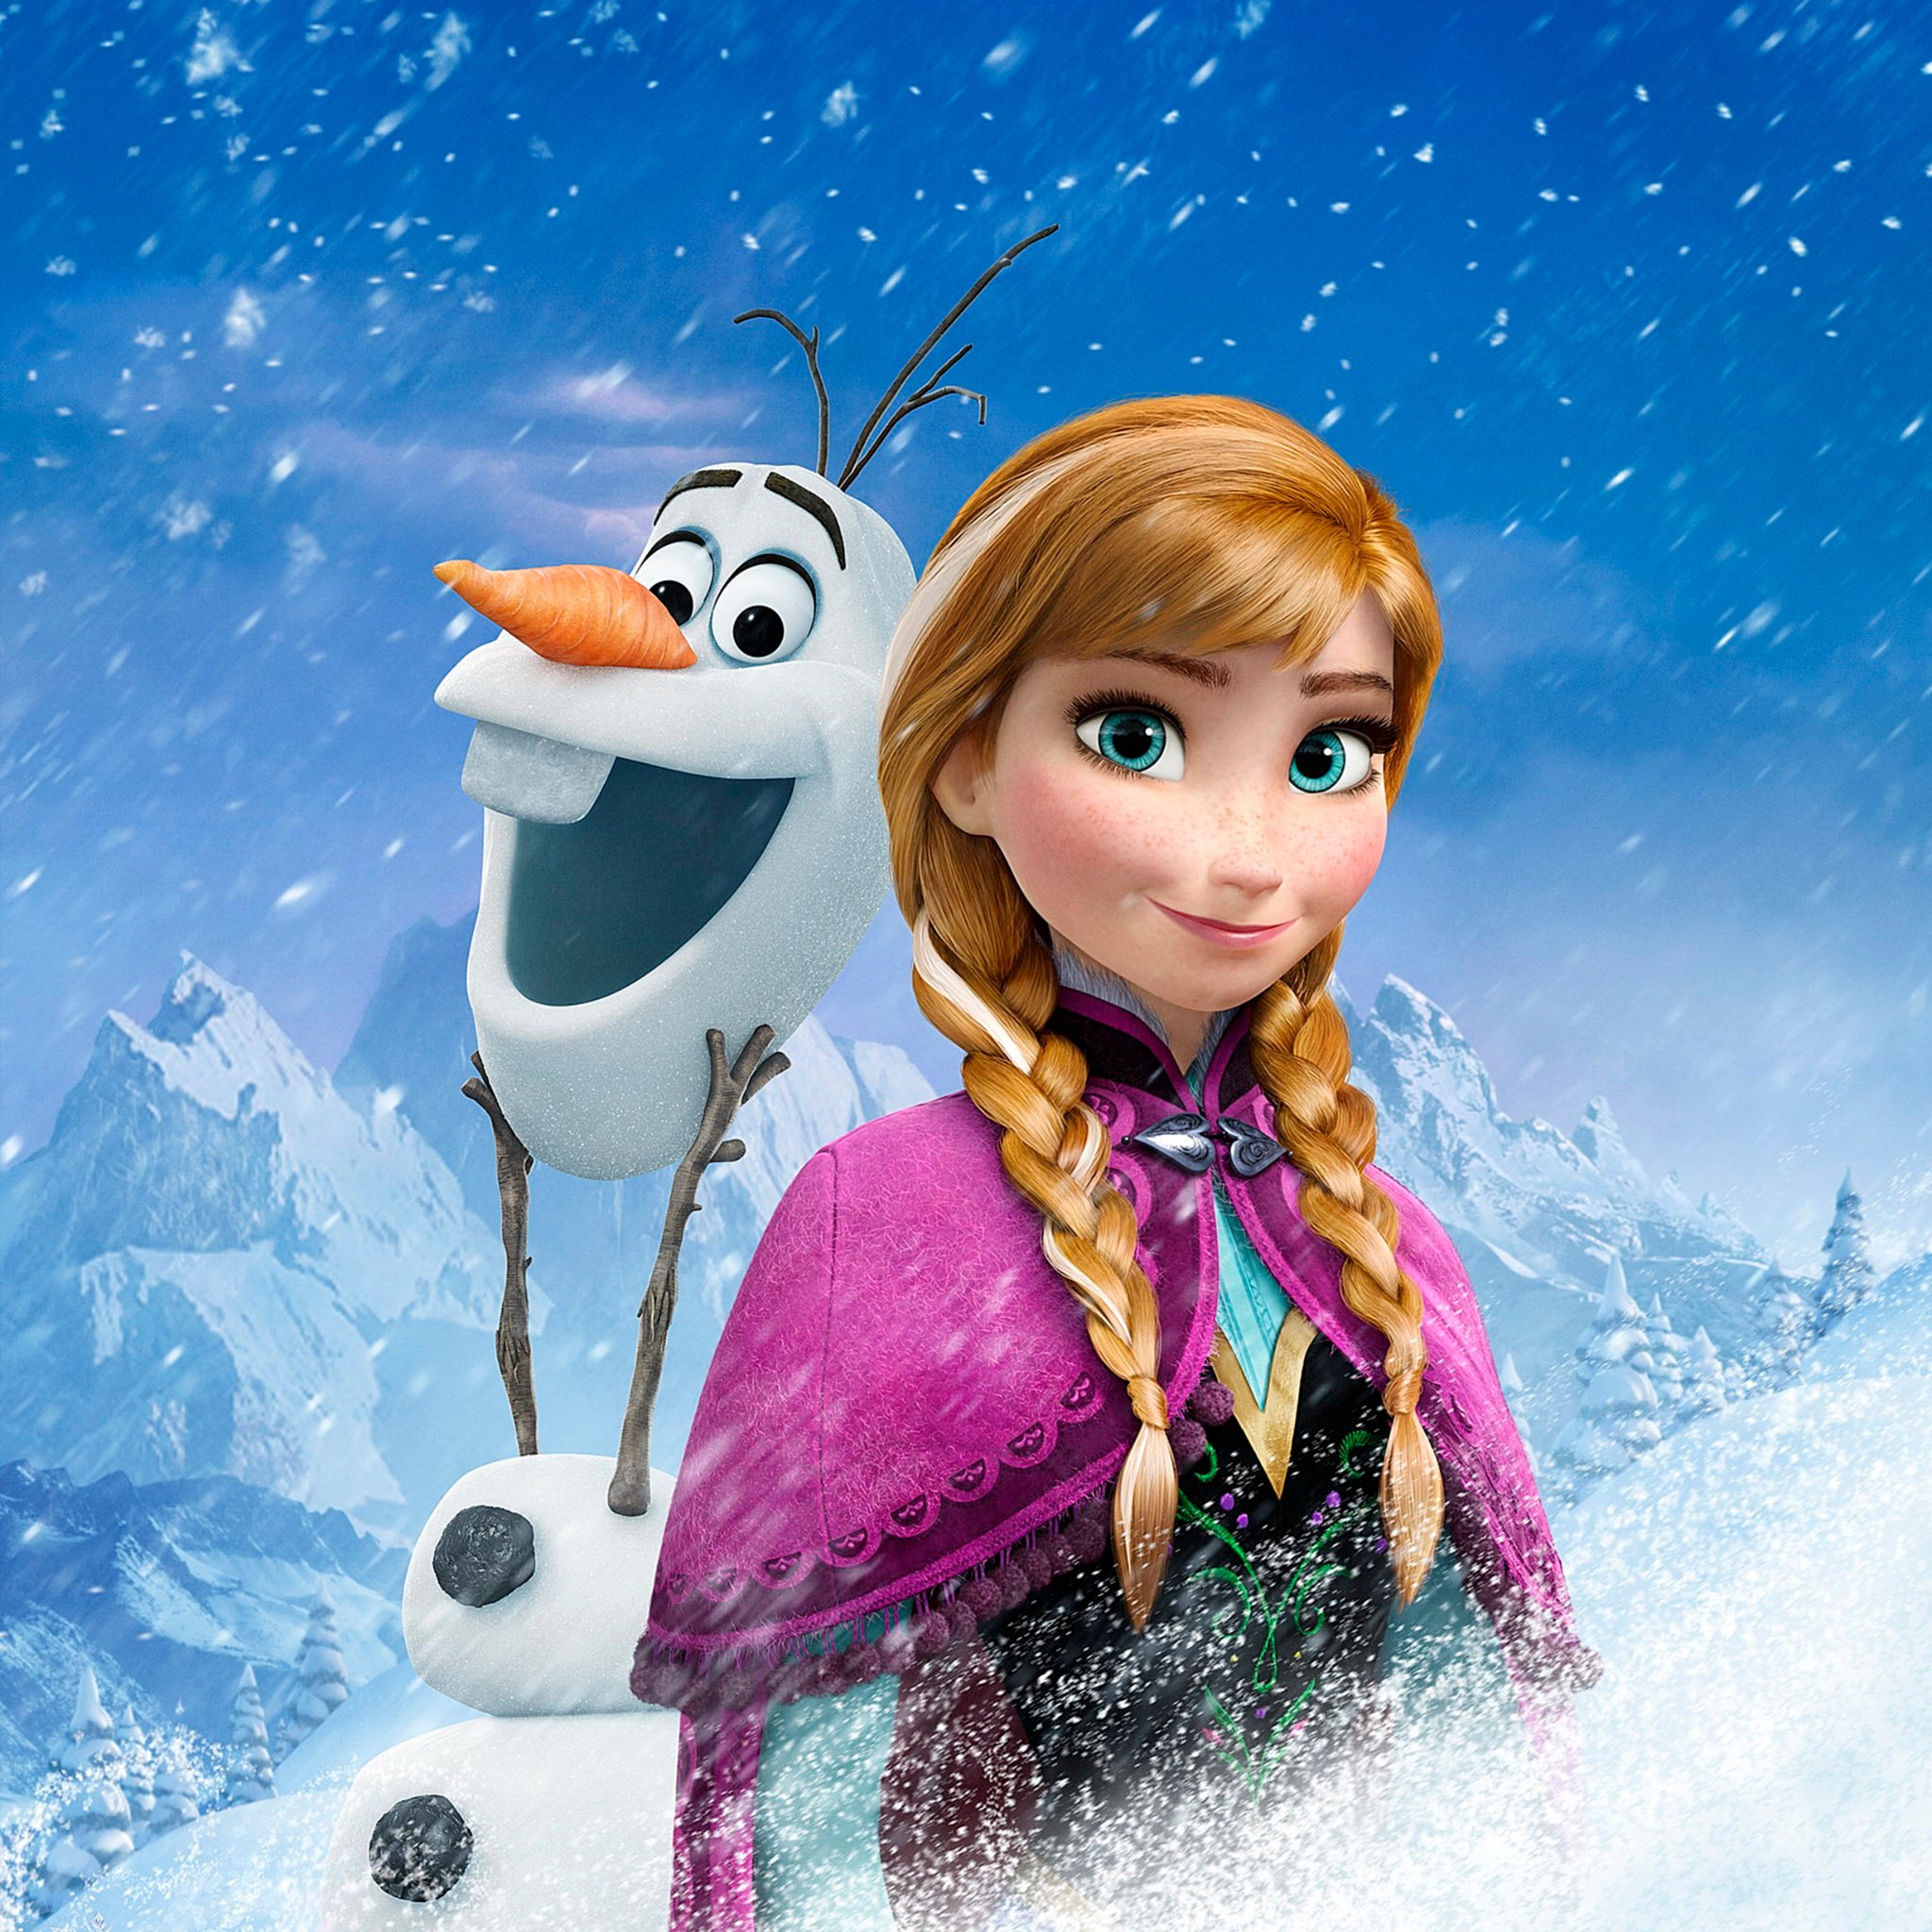  Frozen [iPad] Free 20482048 Wallpapers for iPad